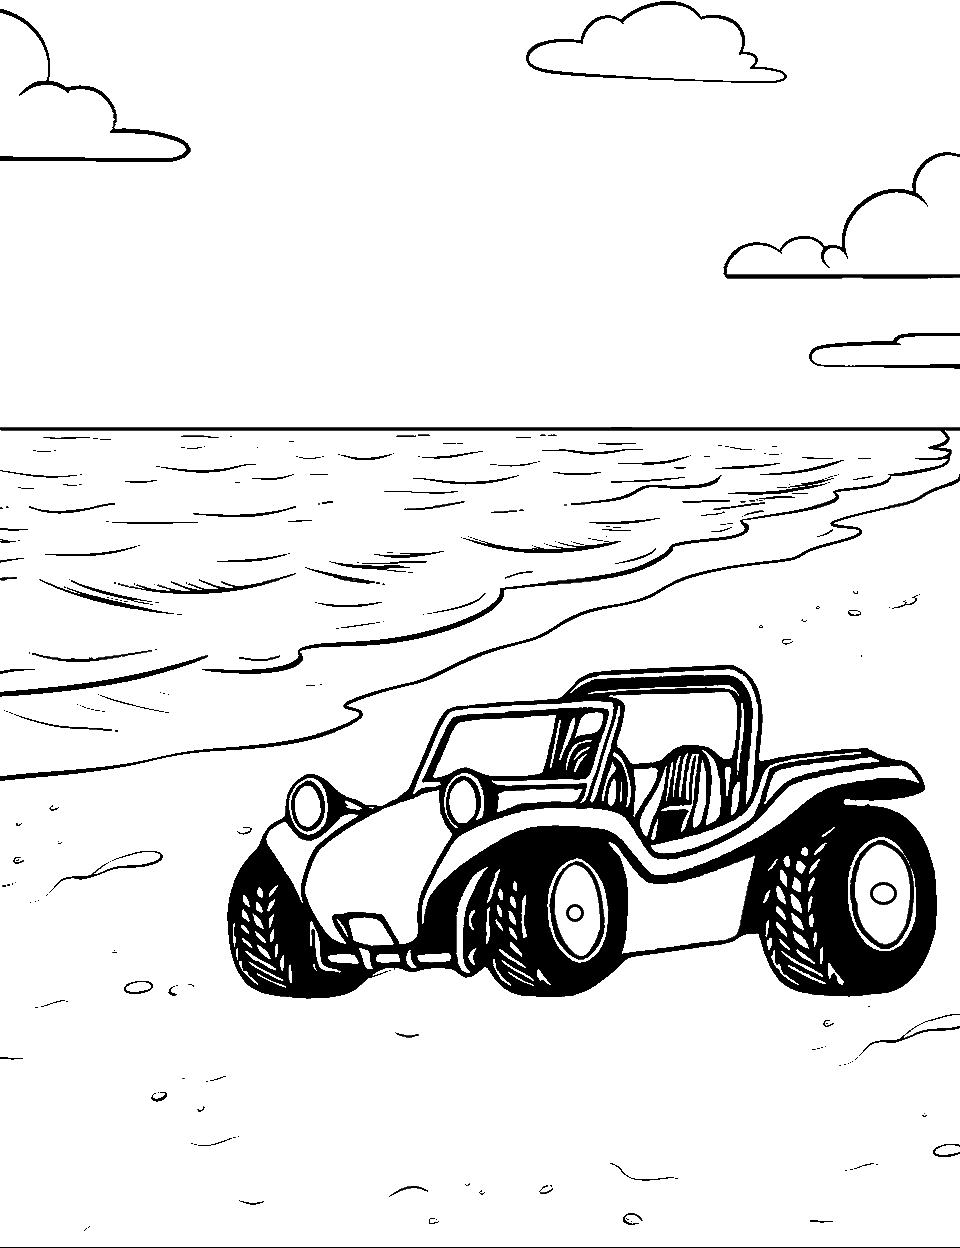 Beachside Buggy Race Car Coloring Page - A buggy racing on a sandy beach.